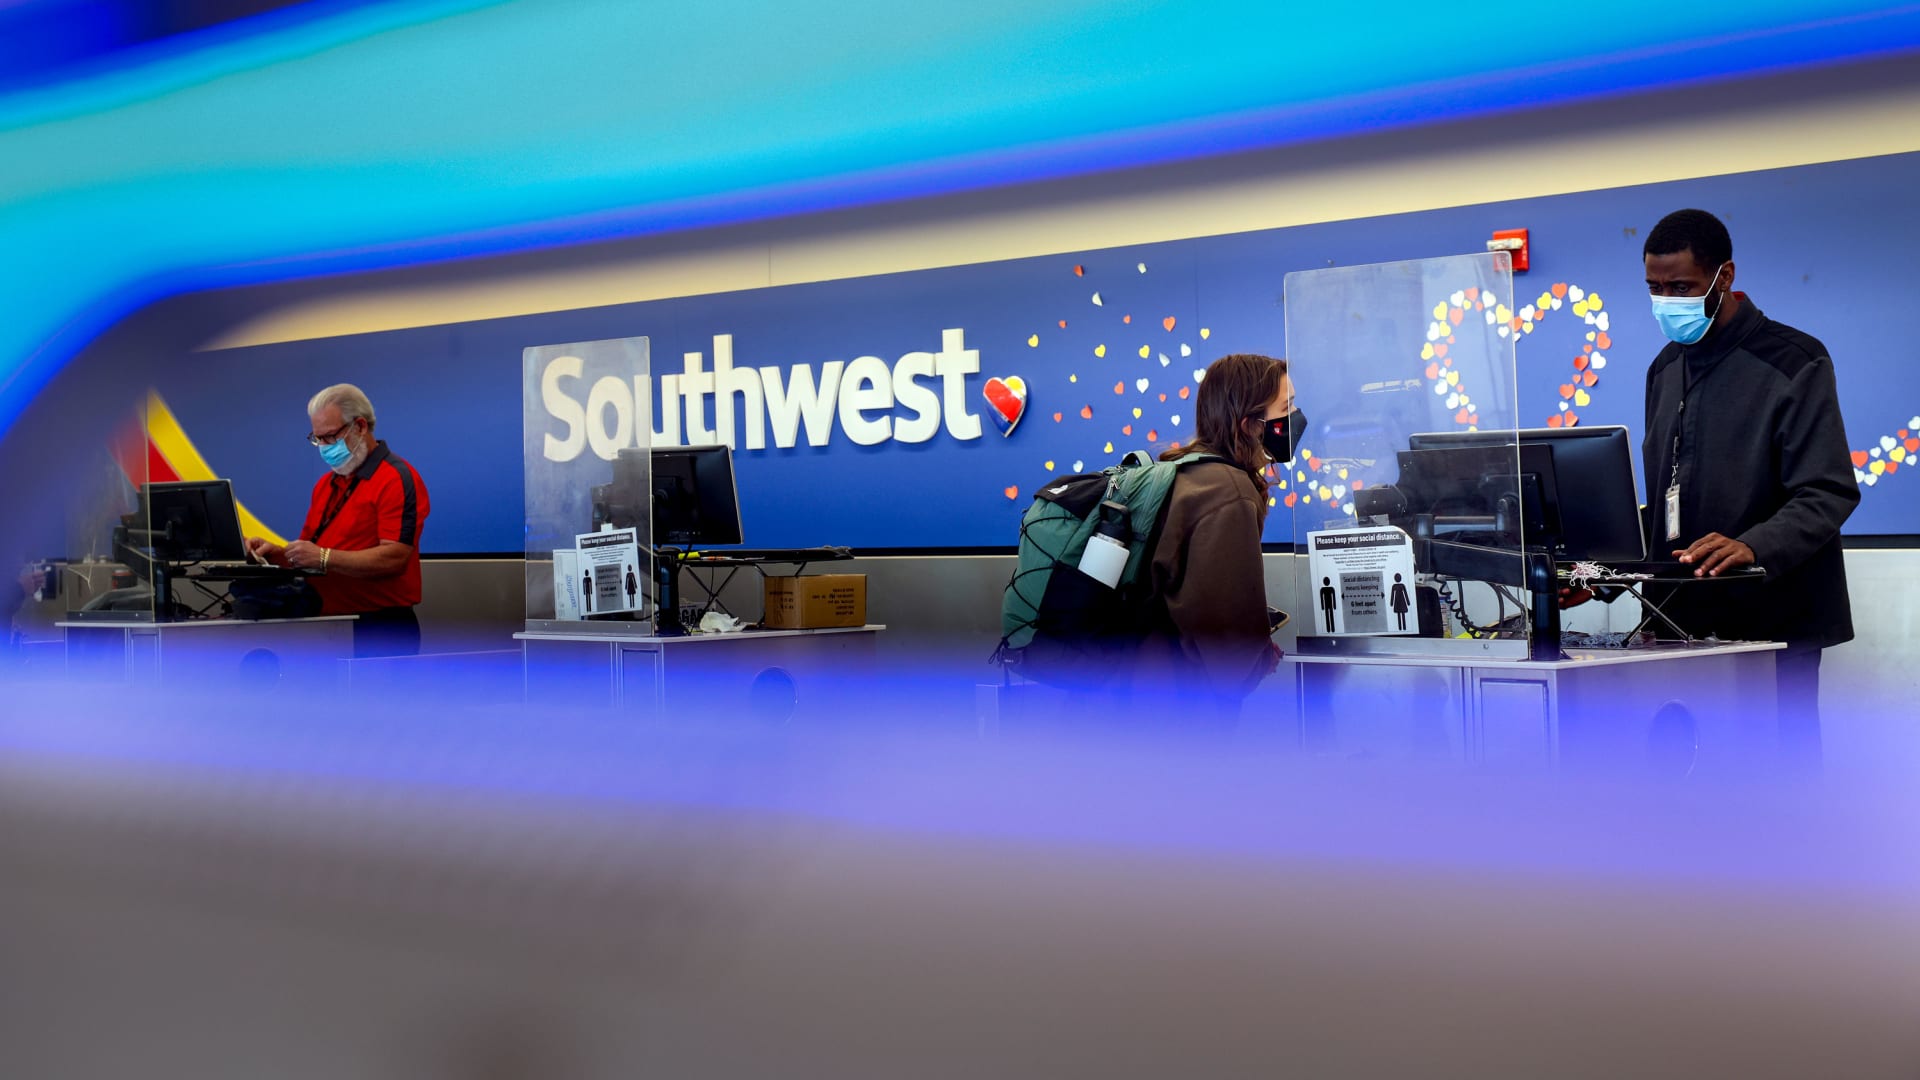 A Southwest Airlines ticketing counter at Baltimore/Washington International Thurgood Marshall Airport.